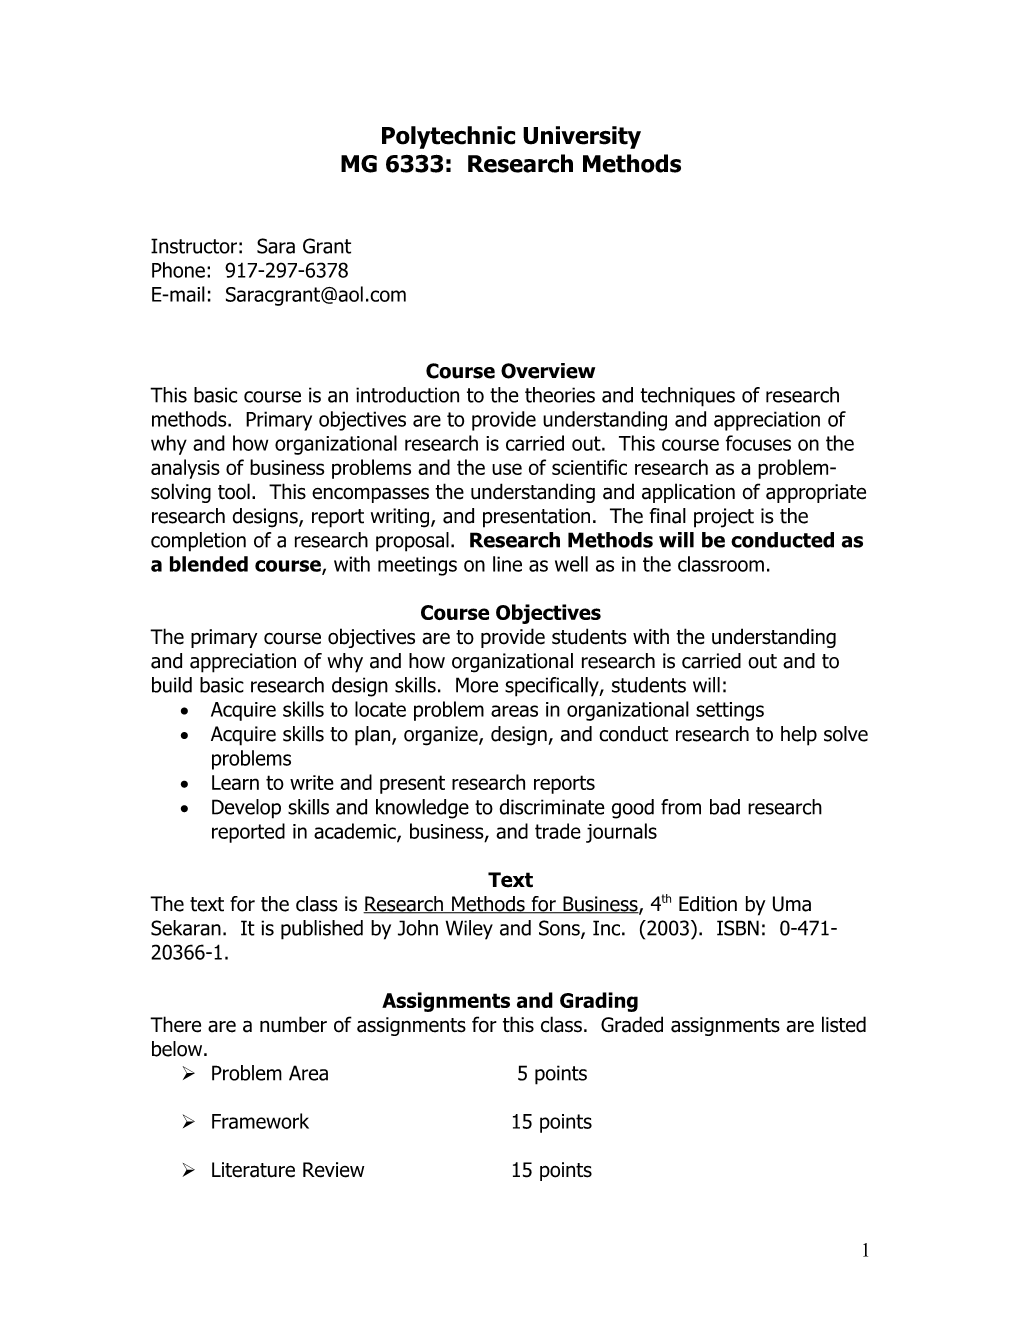 MG 6333: Research Methods